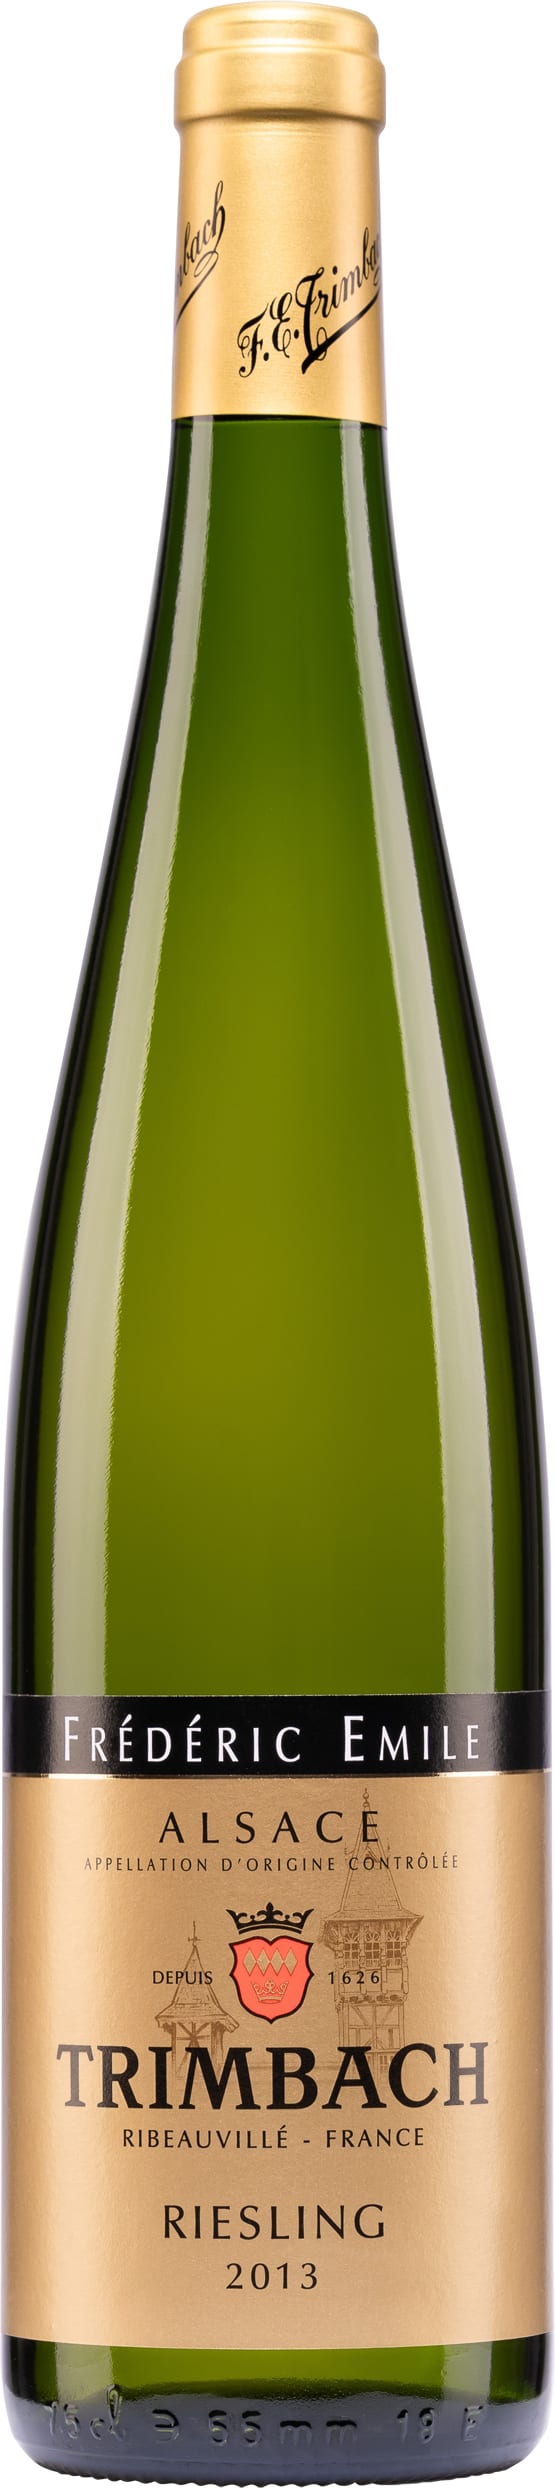 Trimbach Riesling Frederic Emile 375cl 2016 37.5cl - Buy Trimbach Wines from GREAT WINES DIRECT wine shop